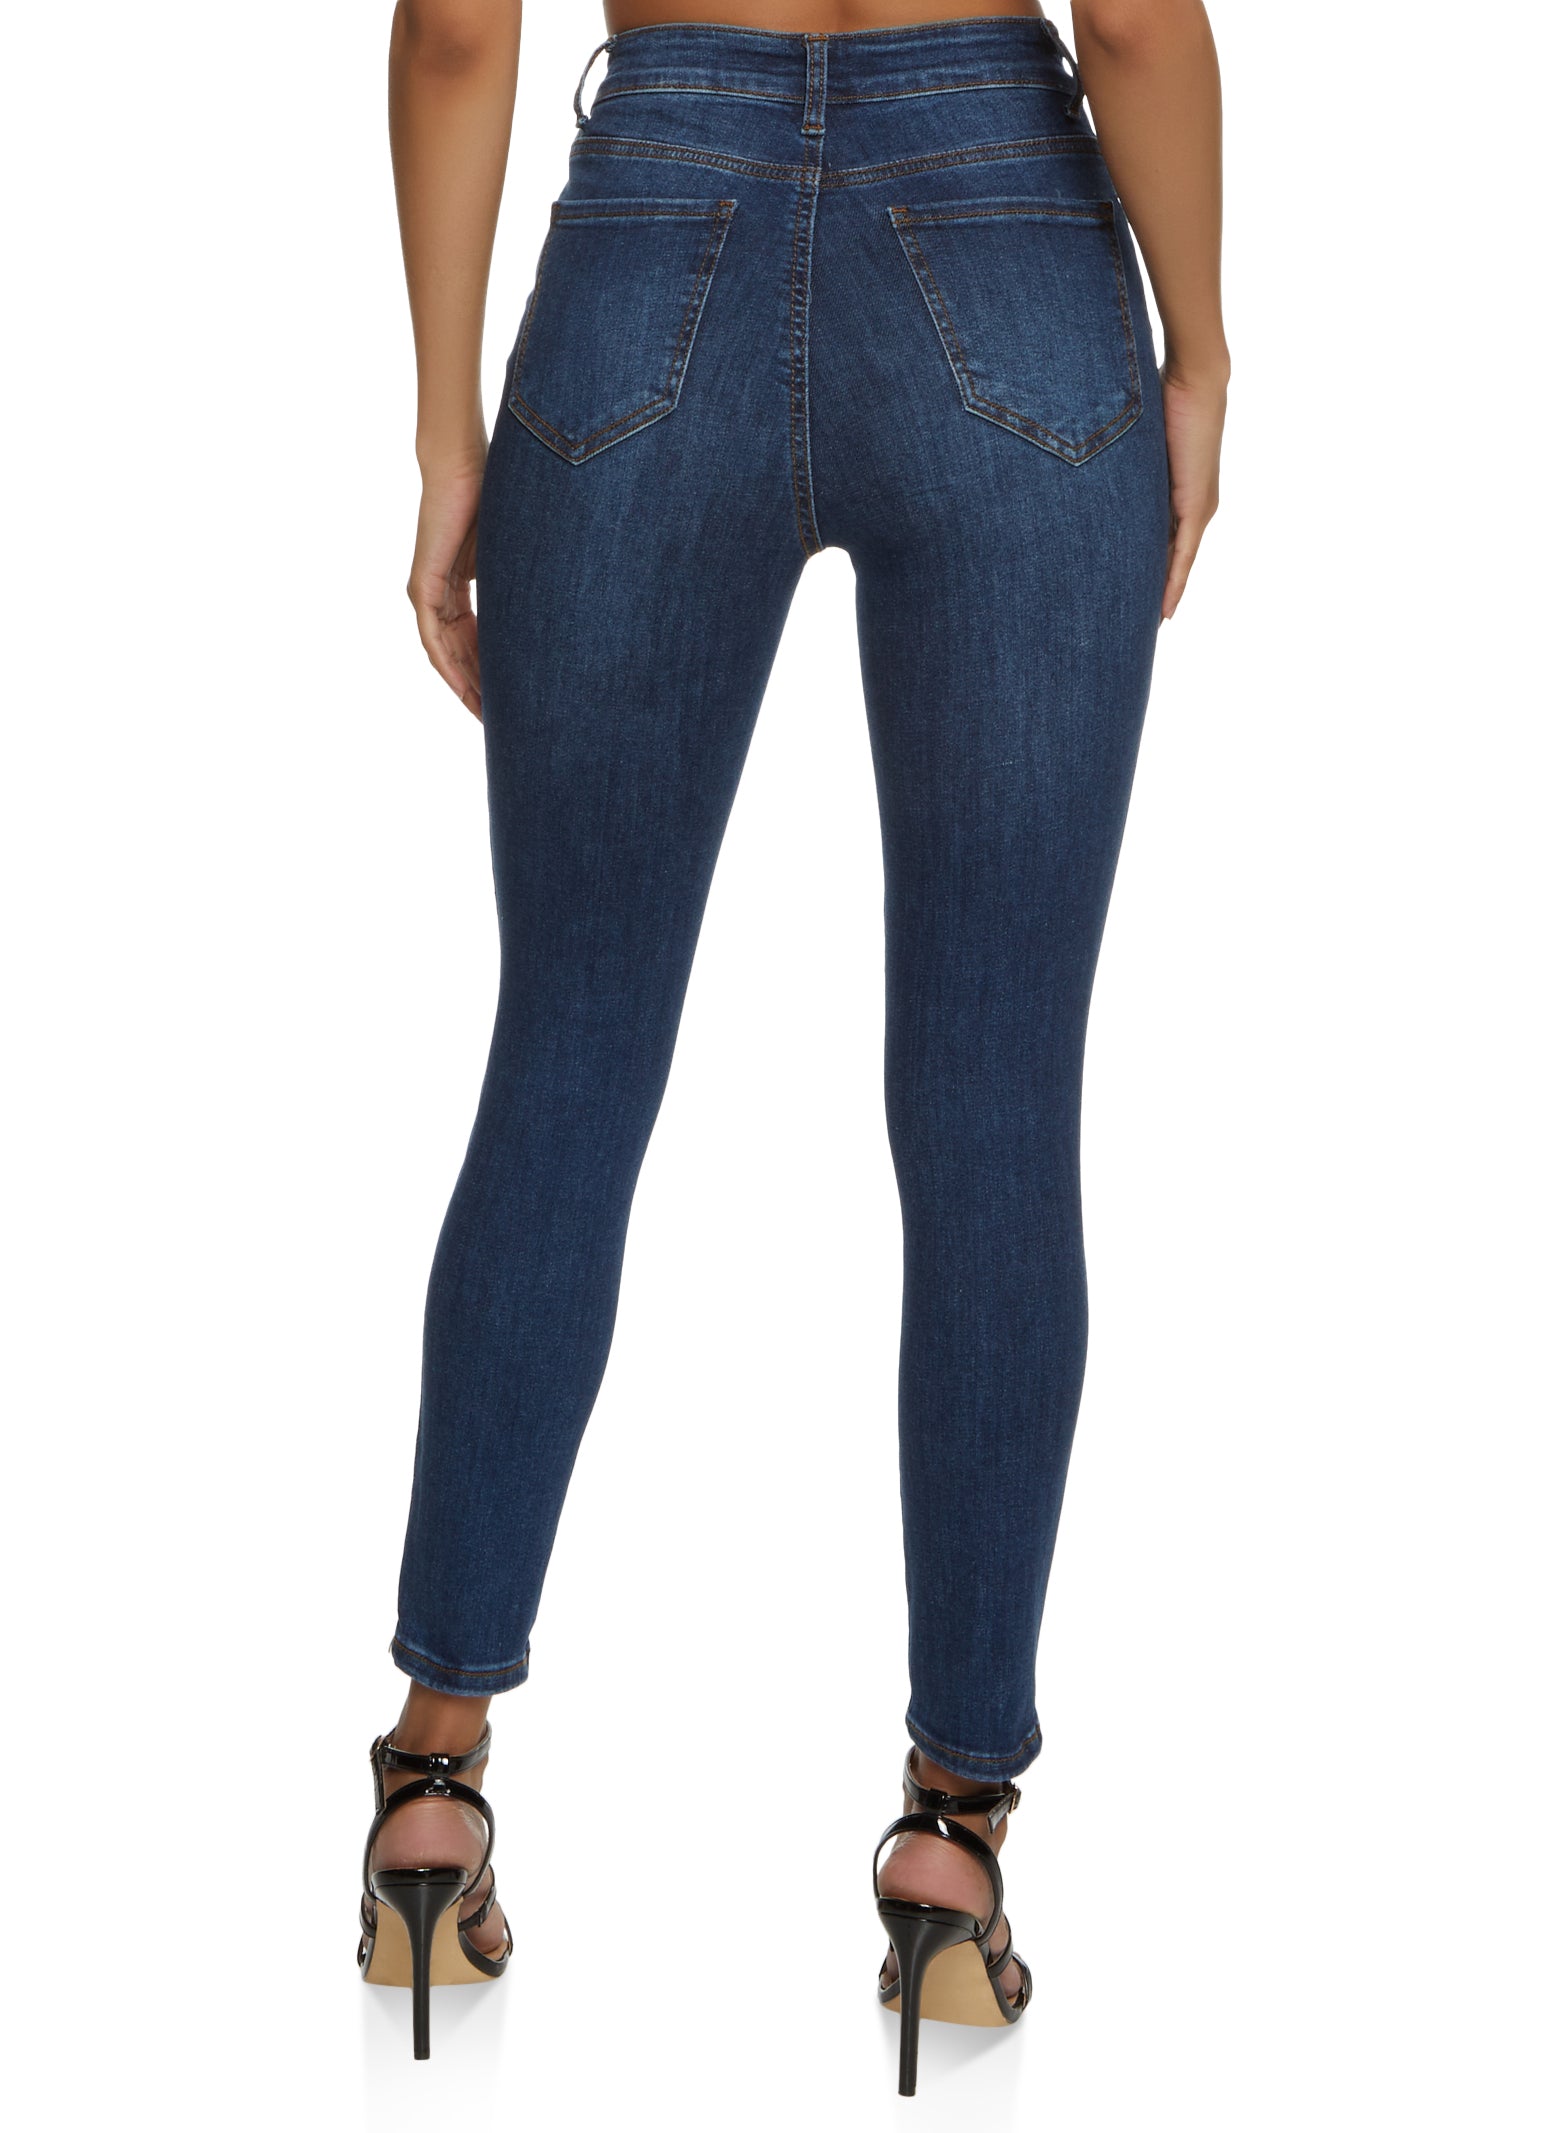 WAX Solid Whiskered Skinny Jeans